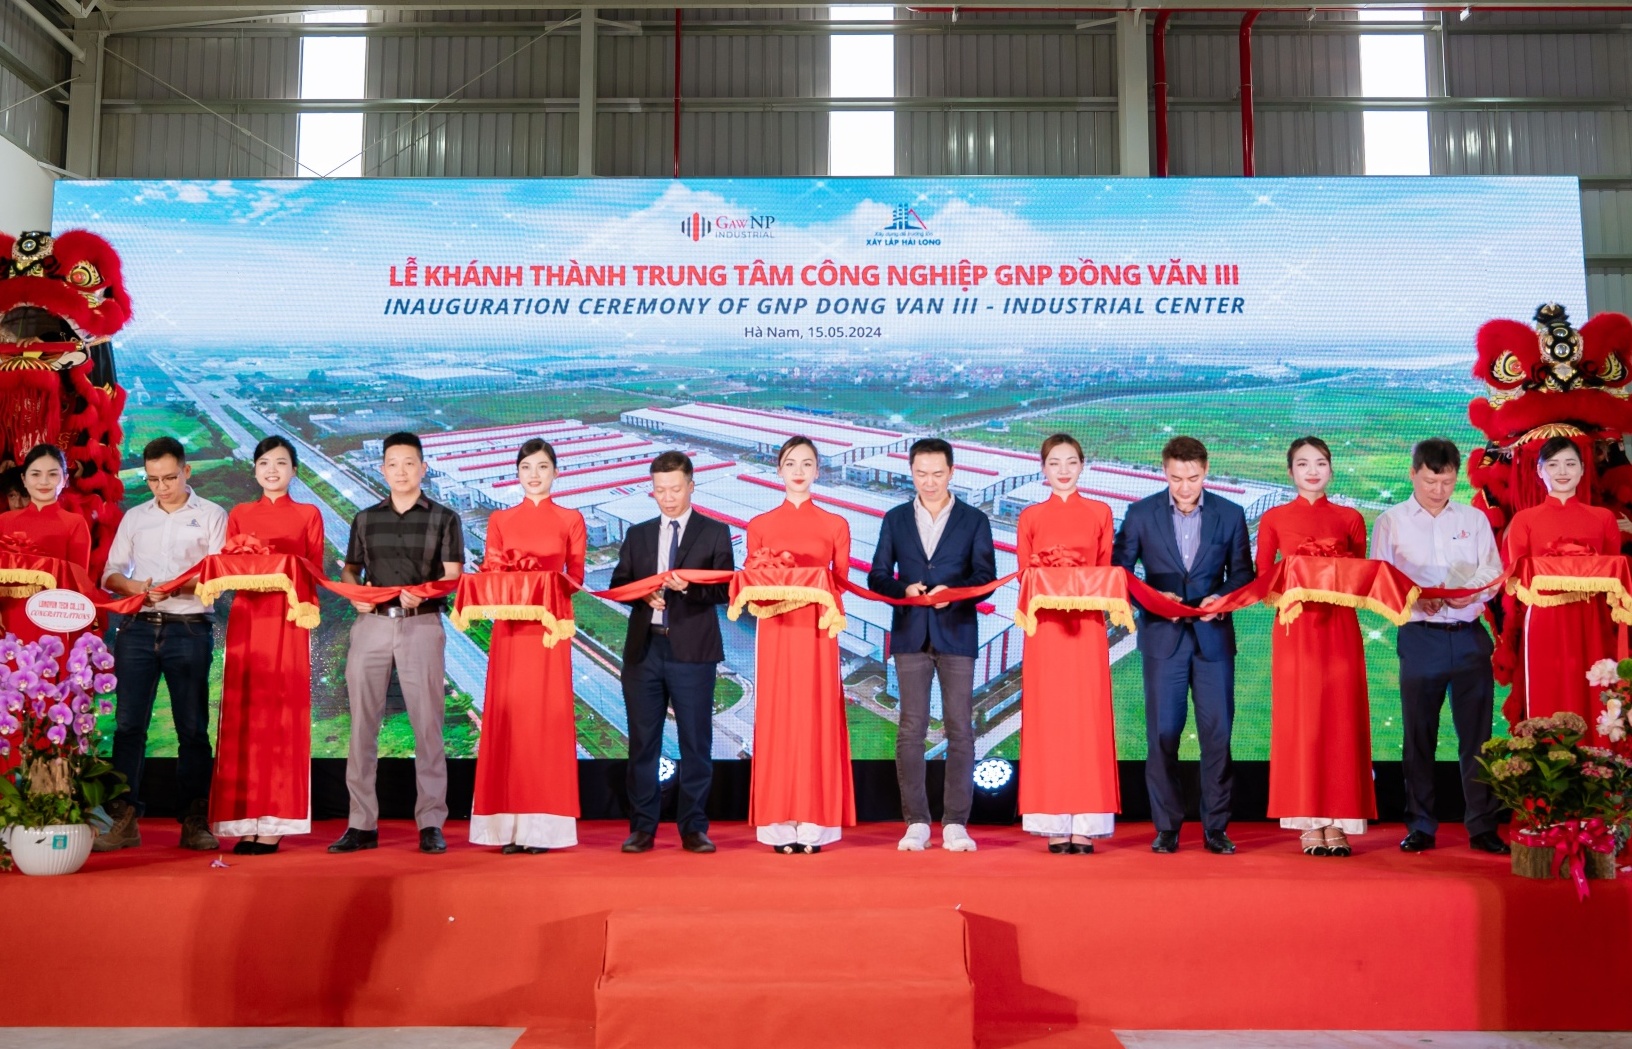 Gaw NP Industrial inaugurates new centre in Ha Nam